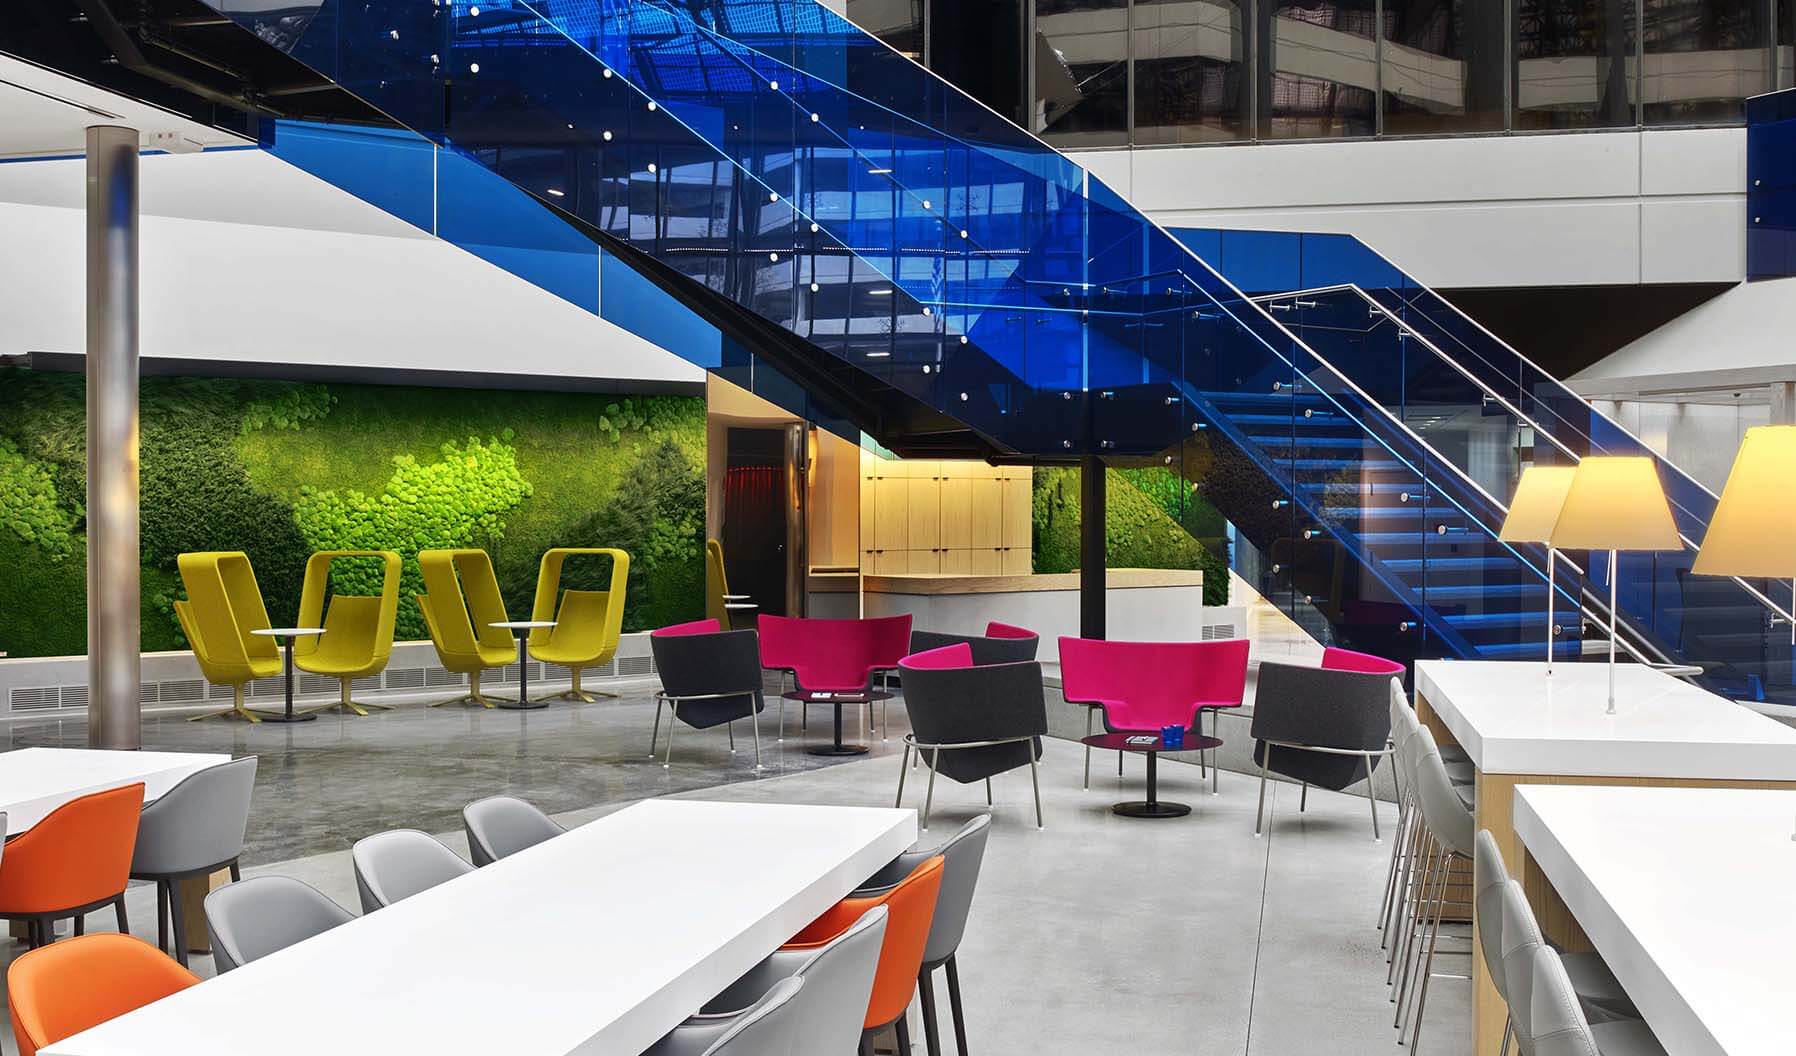 Groupings of Windowseat and Capo lounge chairs in bold pops of color surround the staircase—bringing energy and zest into the social space. The building provides several social spaces designed to support Draper Labs’ creative and collaborative culture.